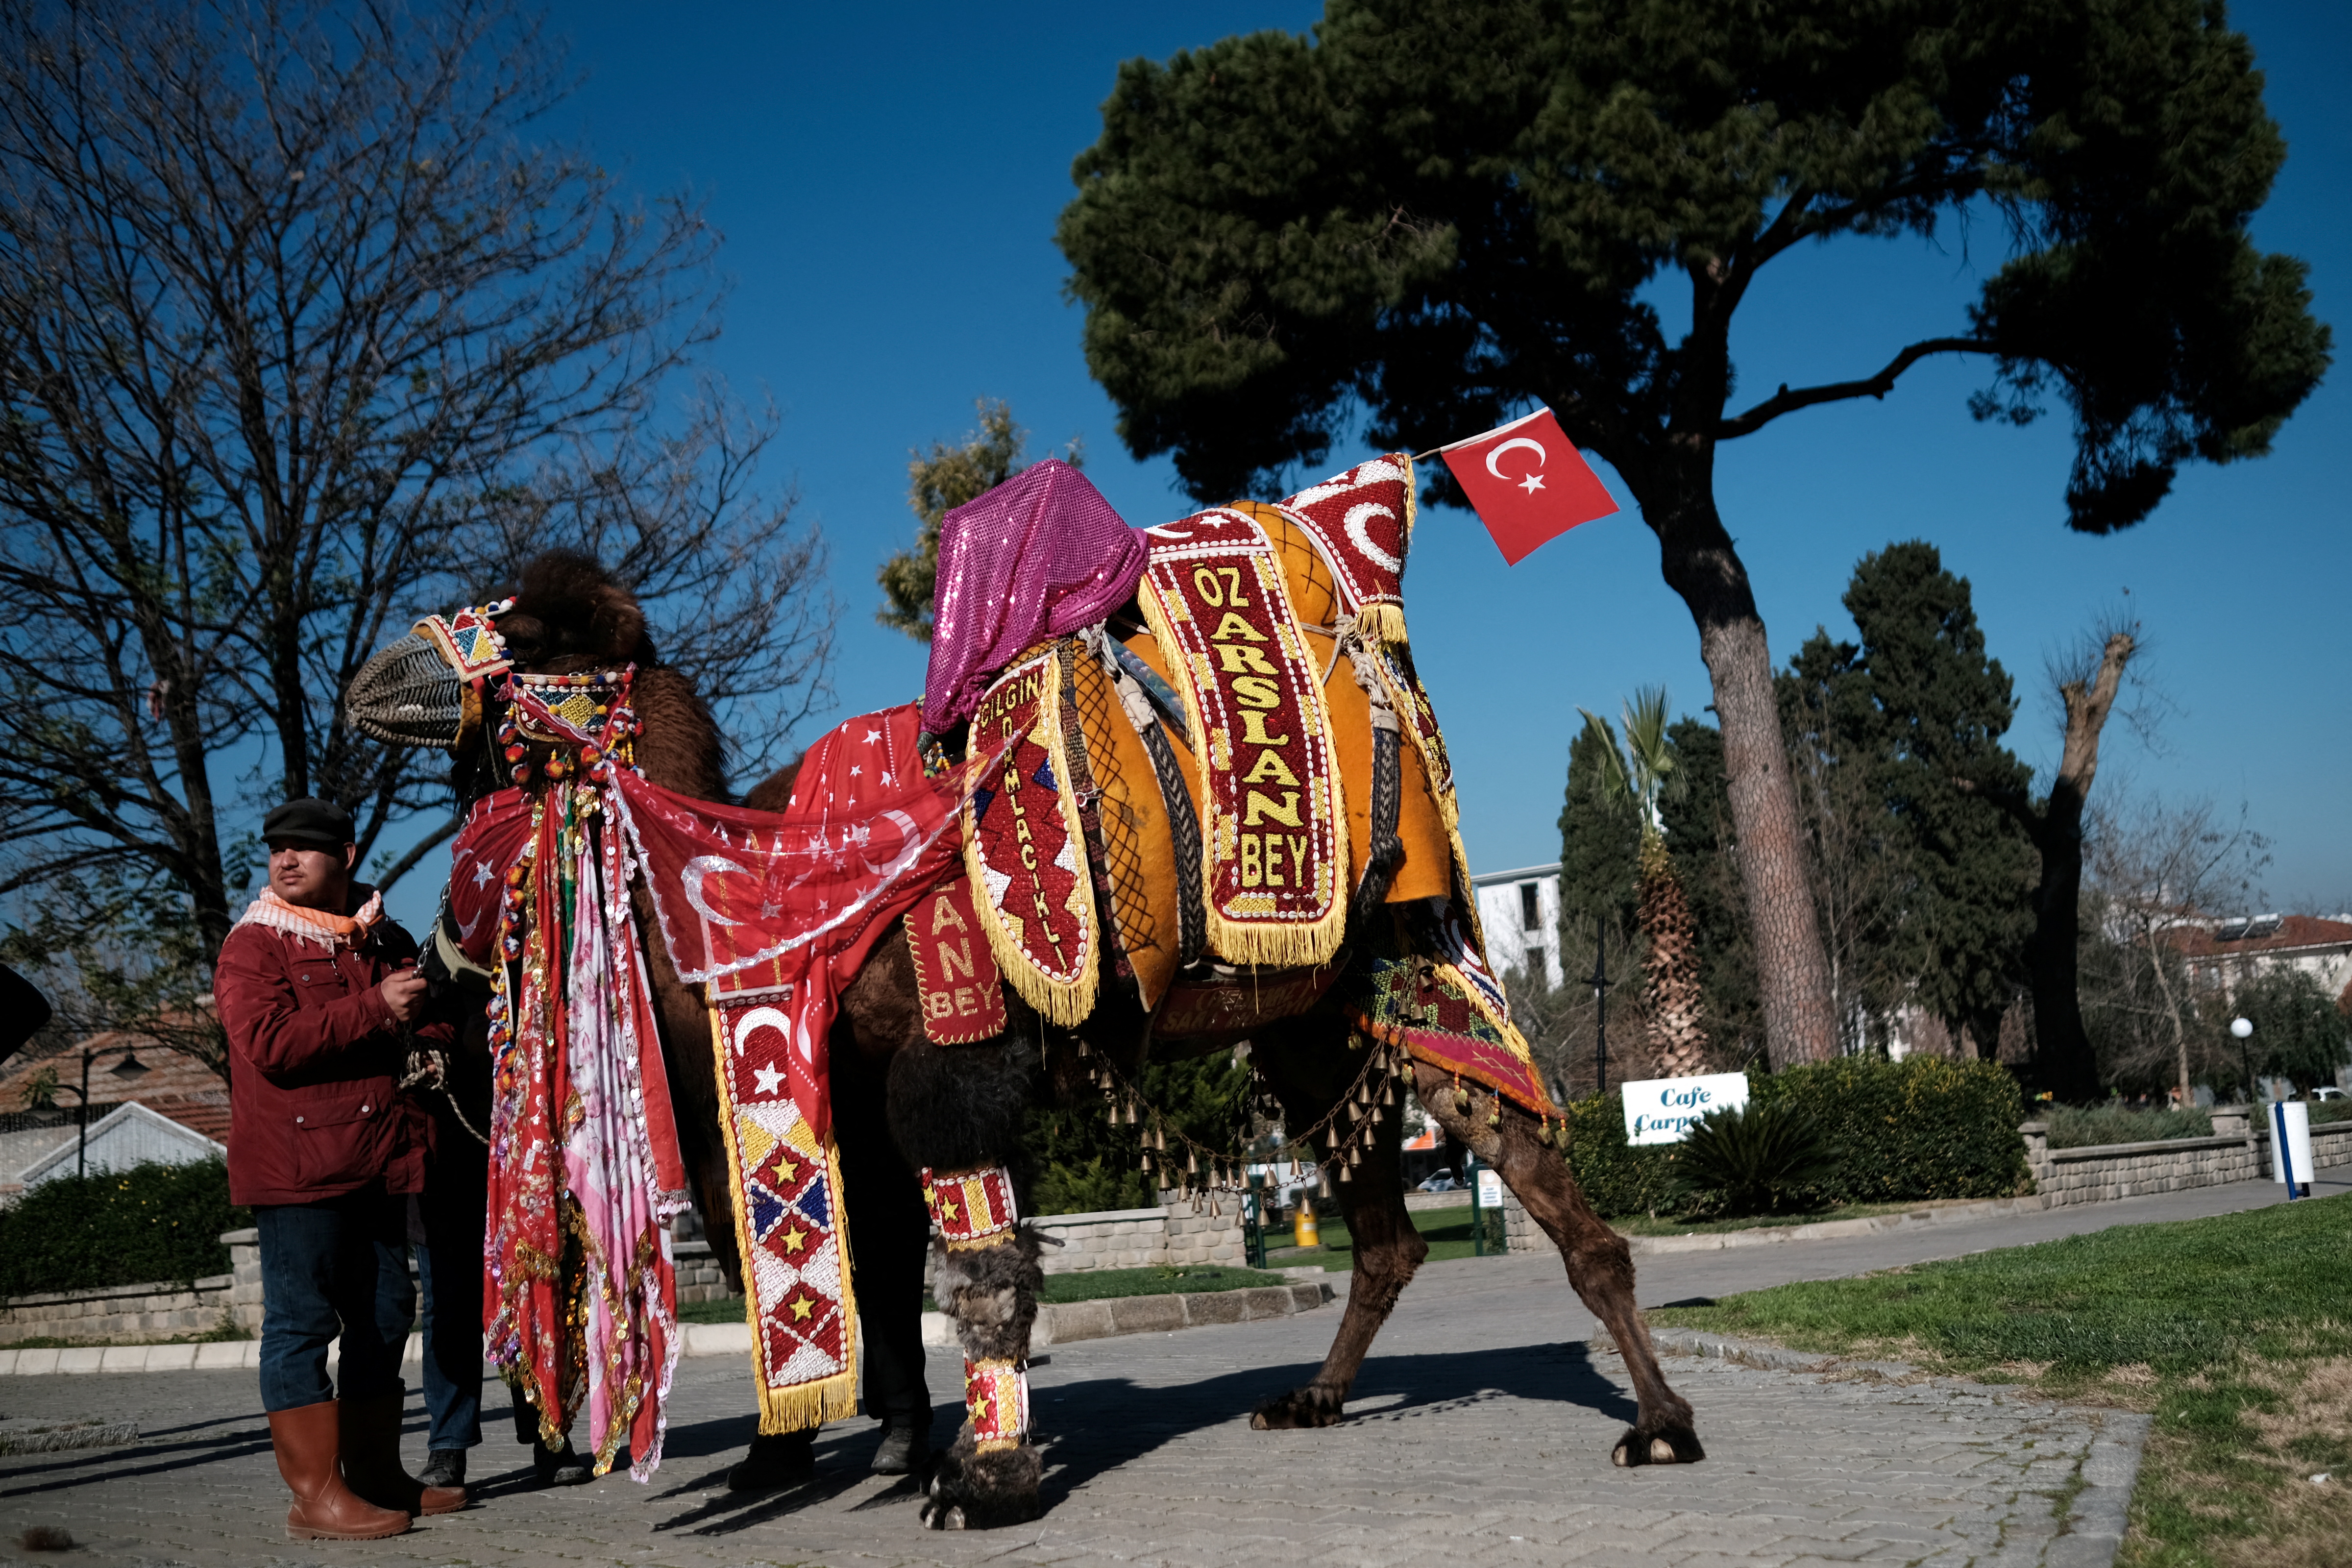 Wrestling camel Ozarslan Bey, adorned with colourful ornaments, is paraded during the Camel Beauty Contest ahead of the annual 40th Efes Selcuk Camel Wrestling Festival, in the Aegean town of Selcuk, near Izmir, Turkey January 15, 2022. Picture taken January 15, 2022. REUTERS/Murad Sezer